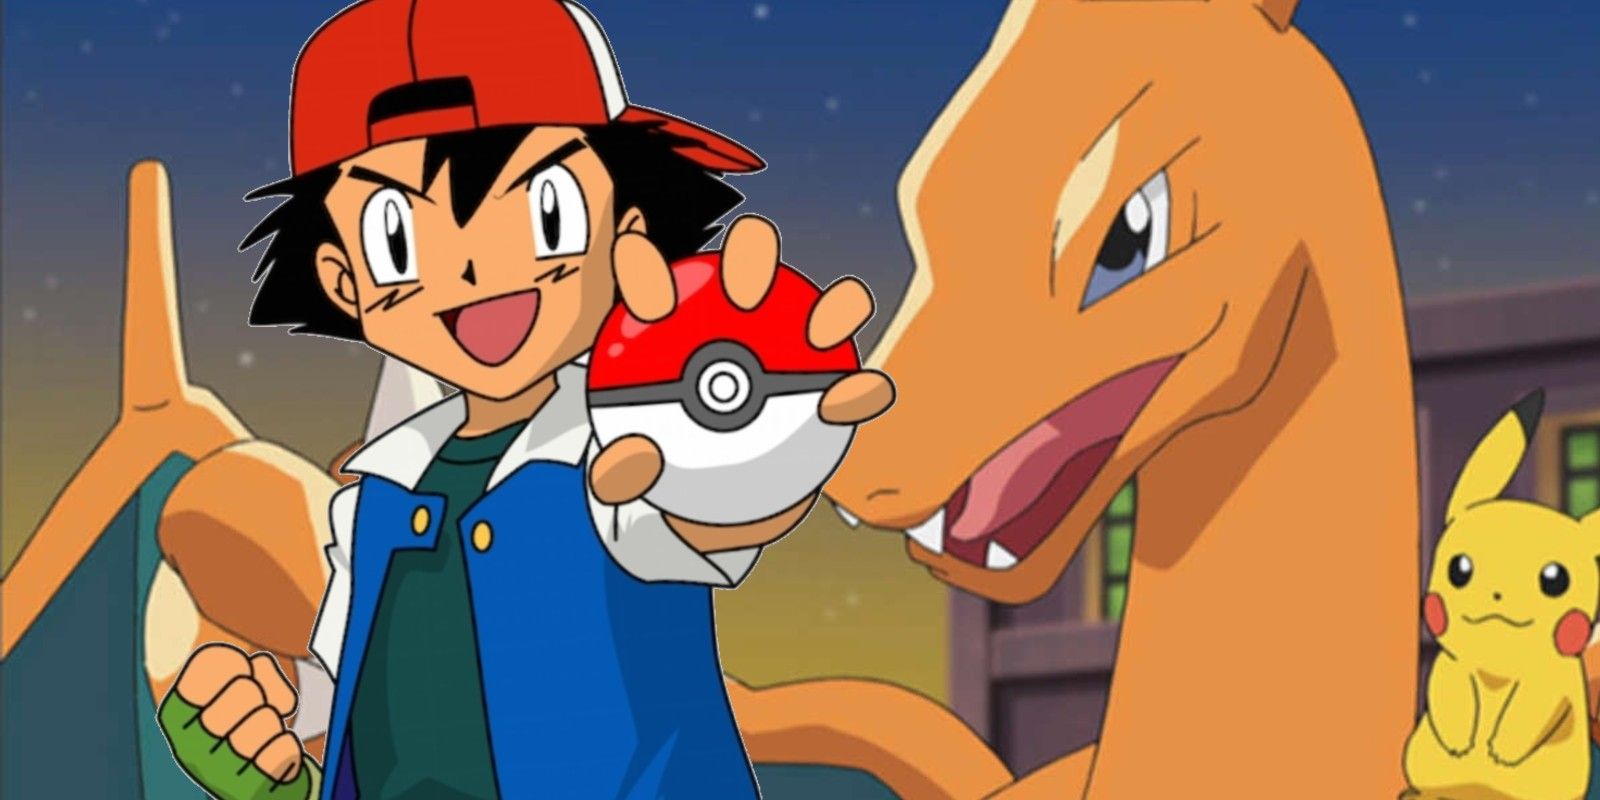 Pokémon: What Happened To Ash's Charizard?